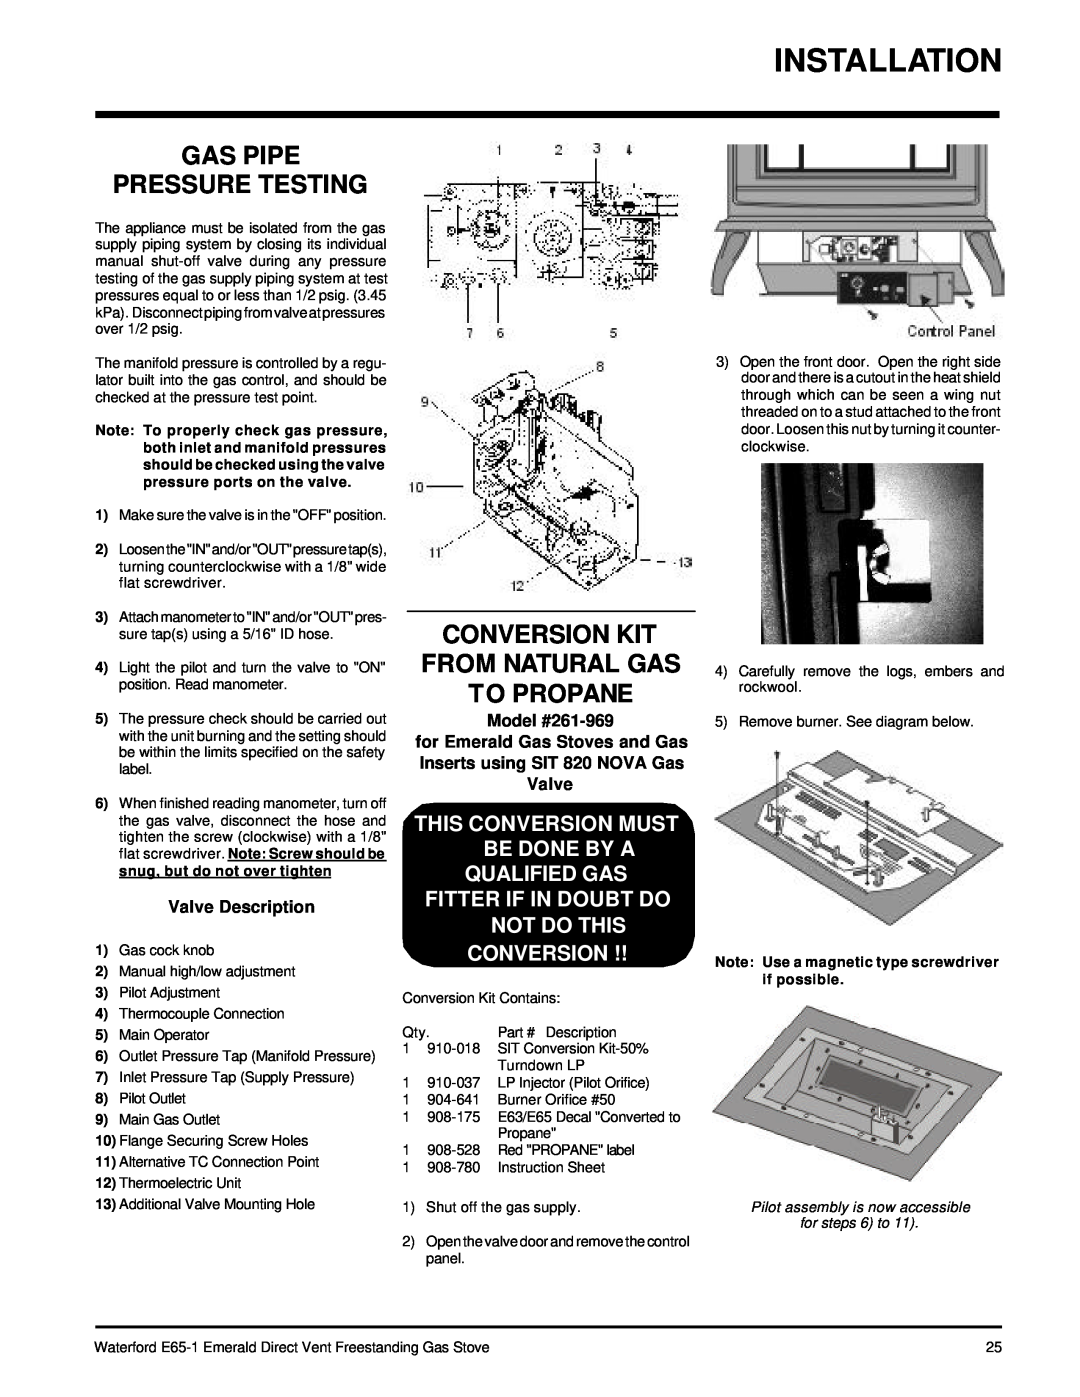 Waterford Appliances E65-LP1 Gas Pipe Pressure Testing, Conversion Kit From Natural Gas To Propane, Valve Description 